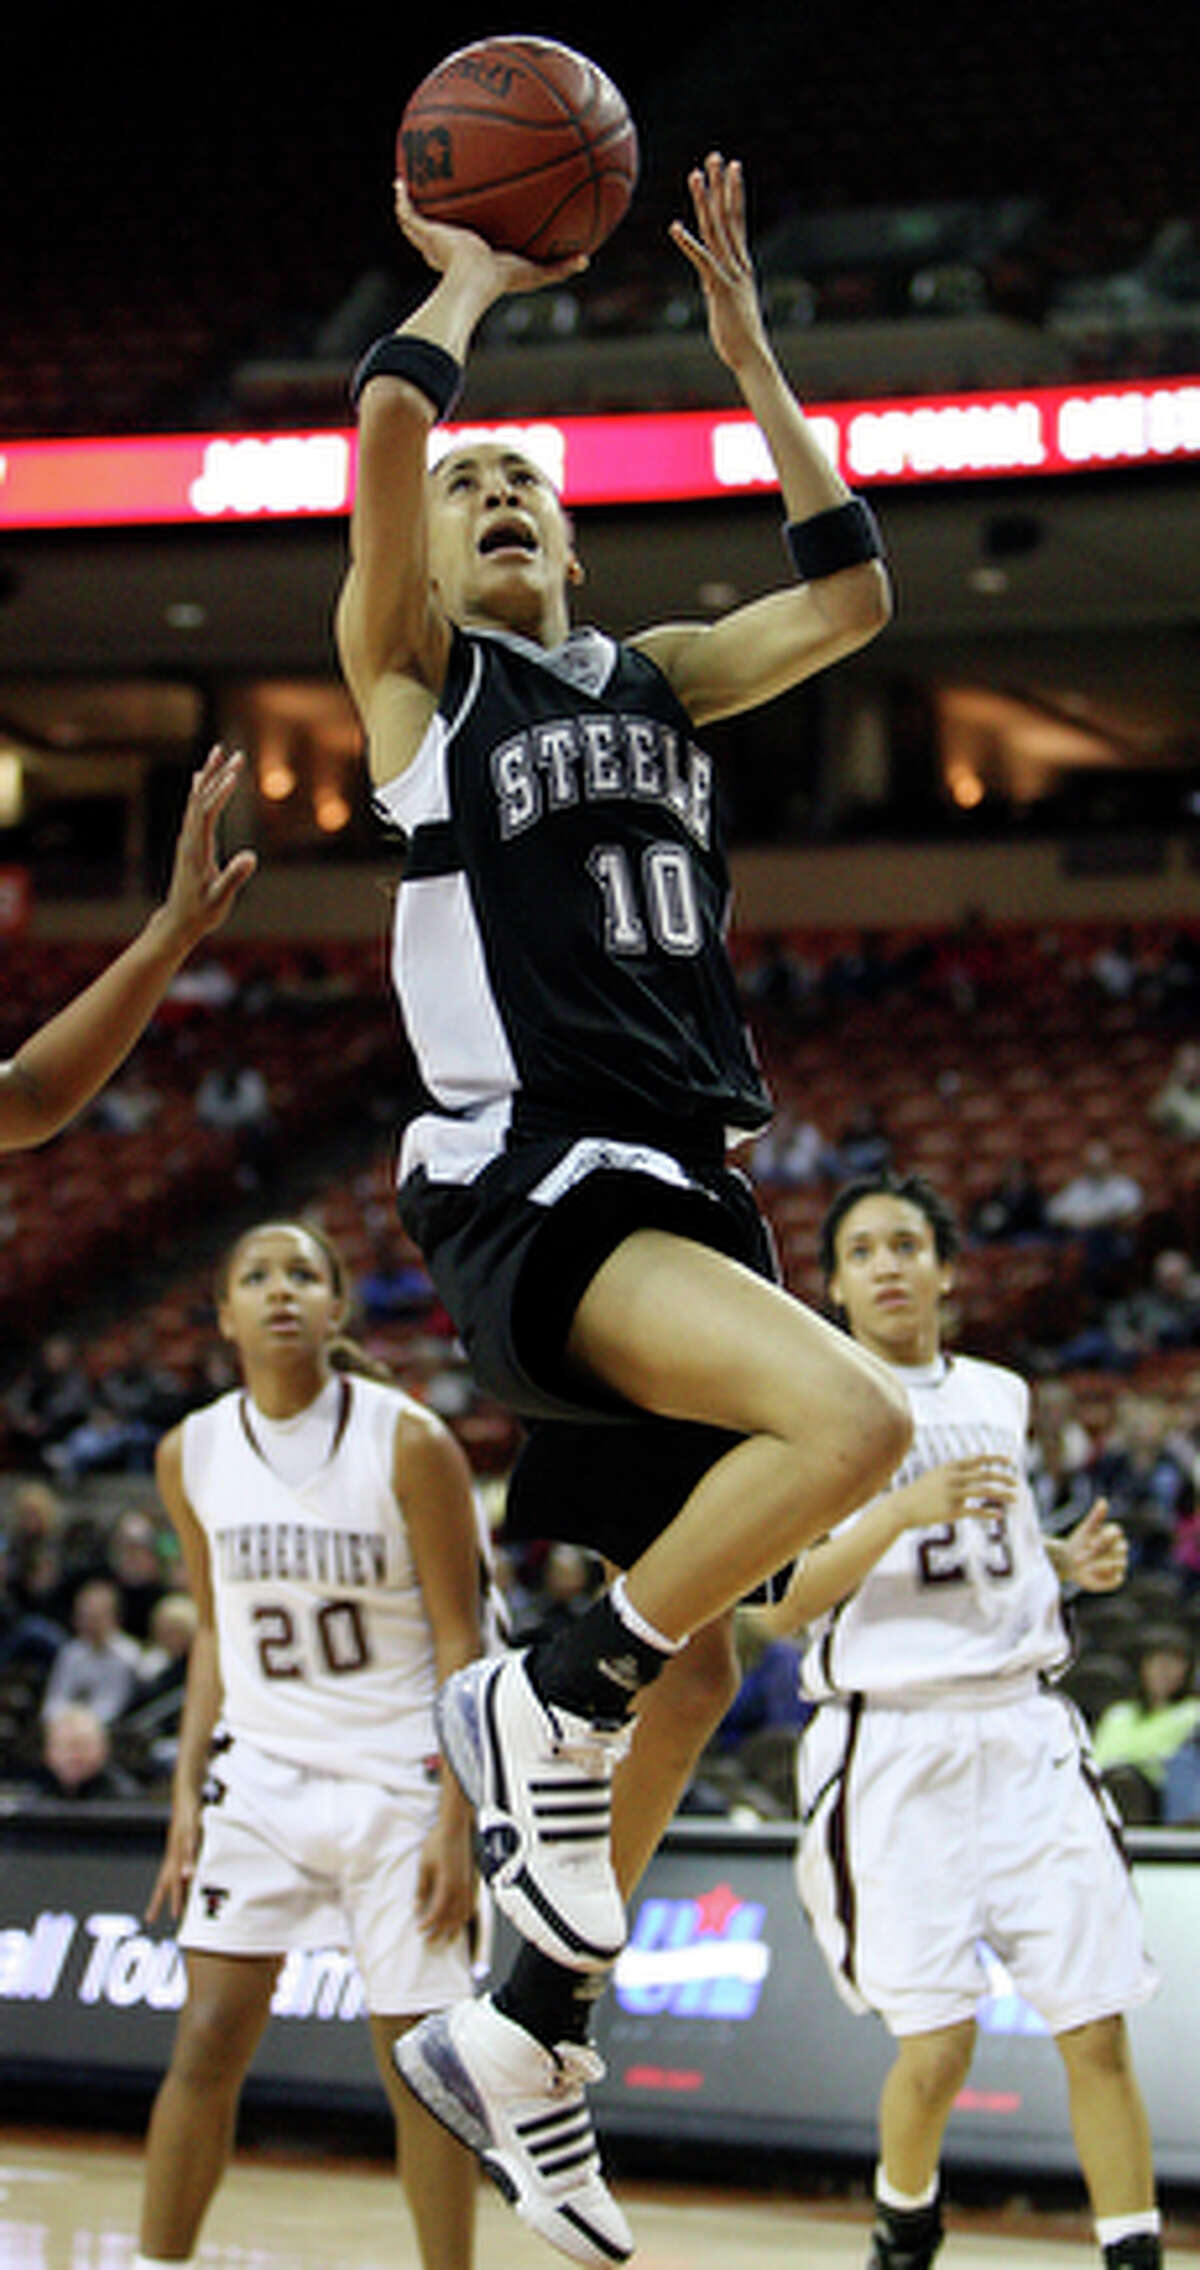 Steele's Meighan Simmons shoots against Timberview during their 2010 UIL 4A state semifinals game Thursday March 4, 2010 in Austin, TX. Timberview won 59-40.